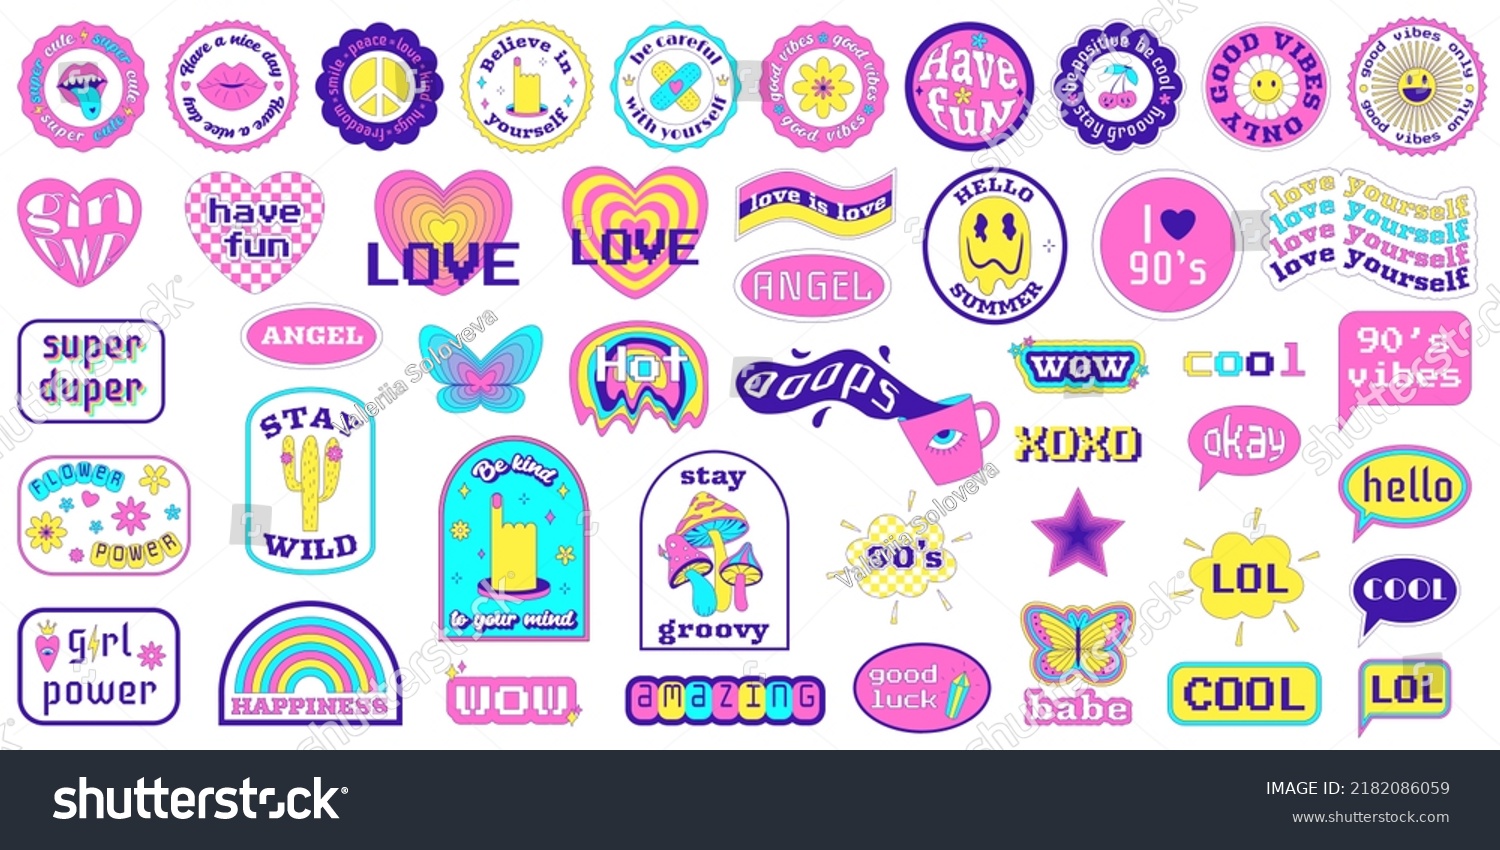 Set Y2k Stickers Text Motivational Positive Stock Vector (Royalty Free ...